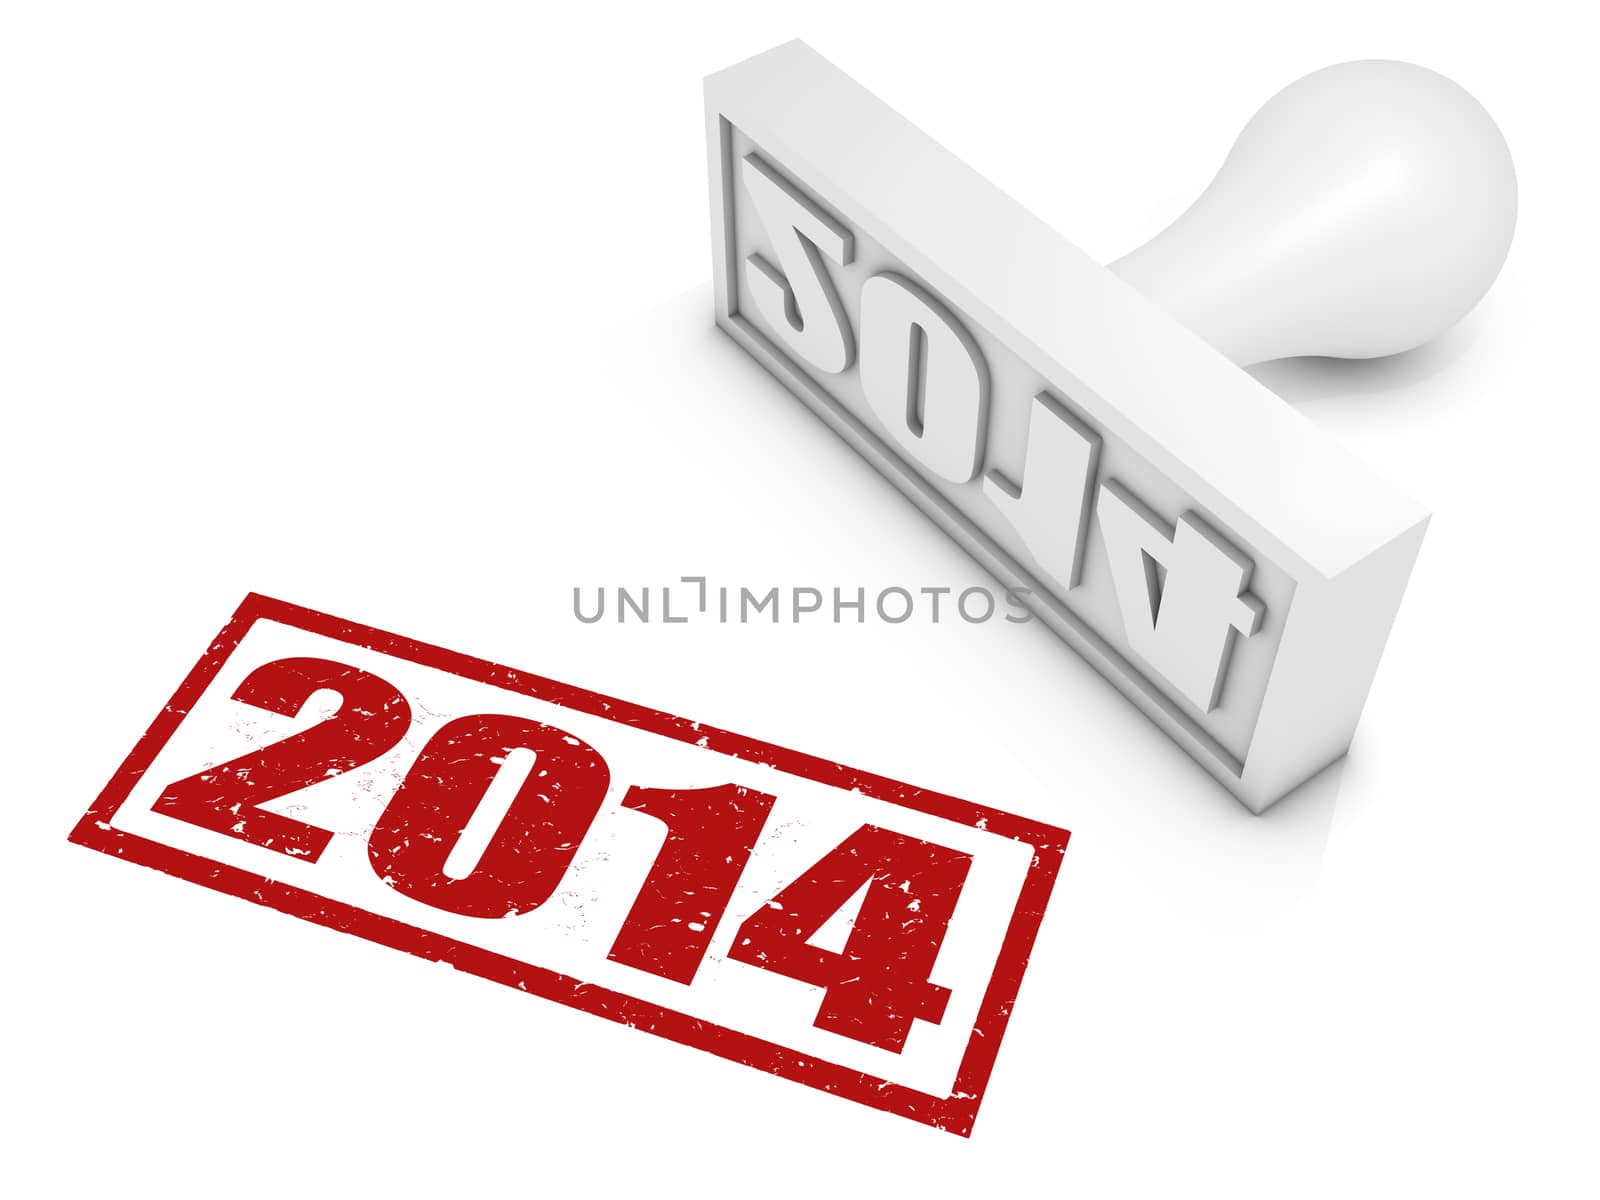 Year 2013 rubber stamp. Part of a series of stamp concepts.